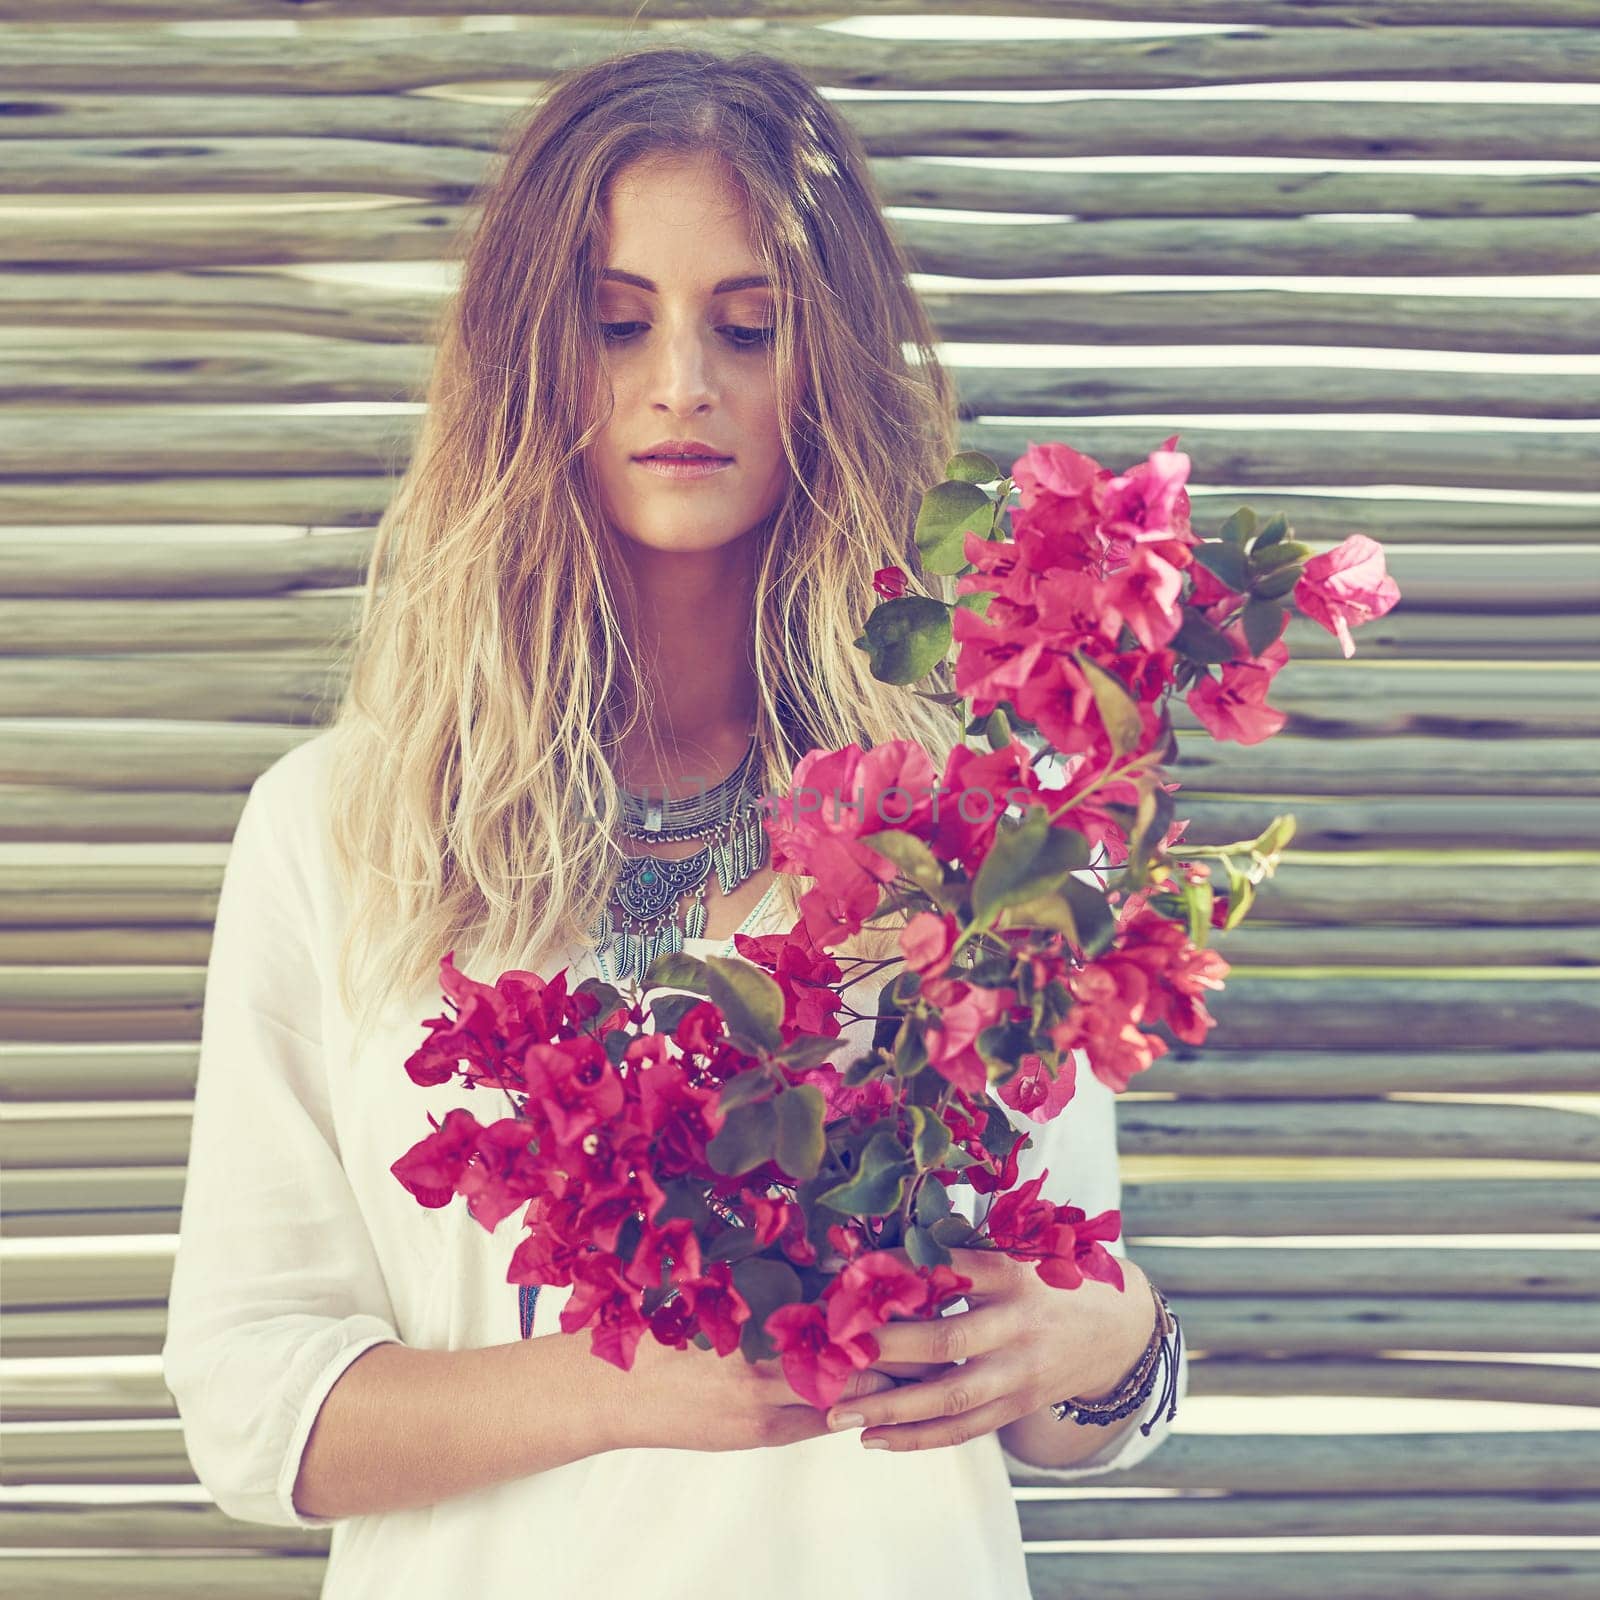 Flower child inspired fashion. an attractive young woman holding a bunch of fresh flowers